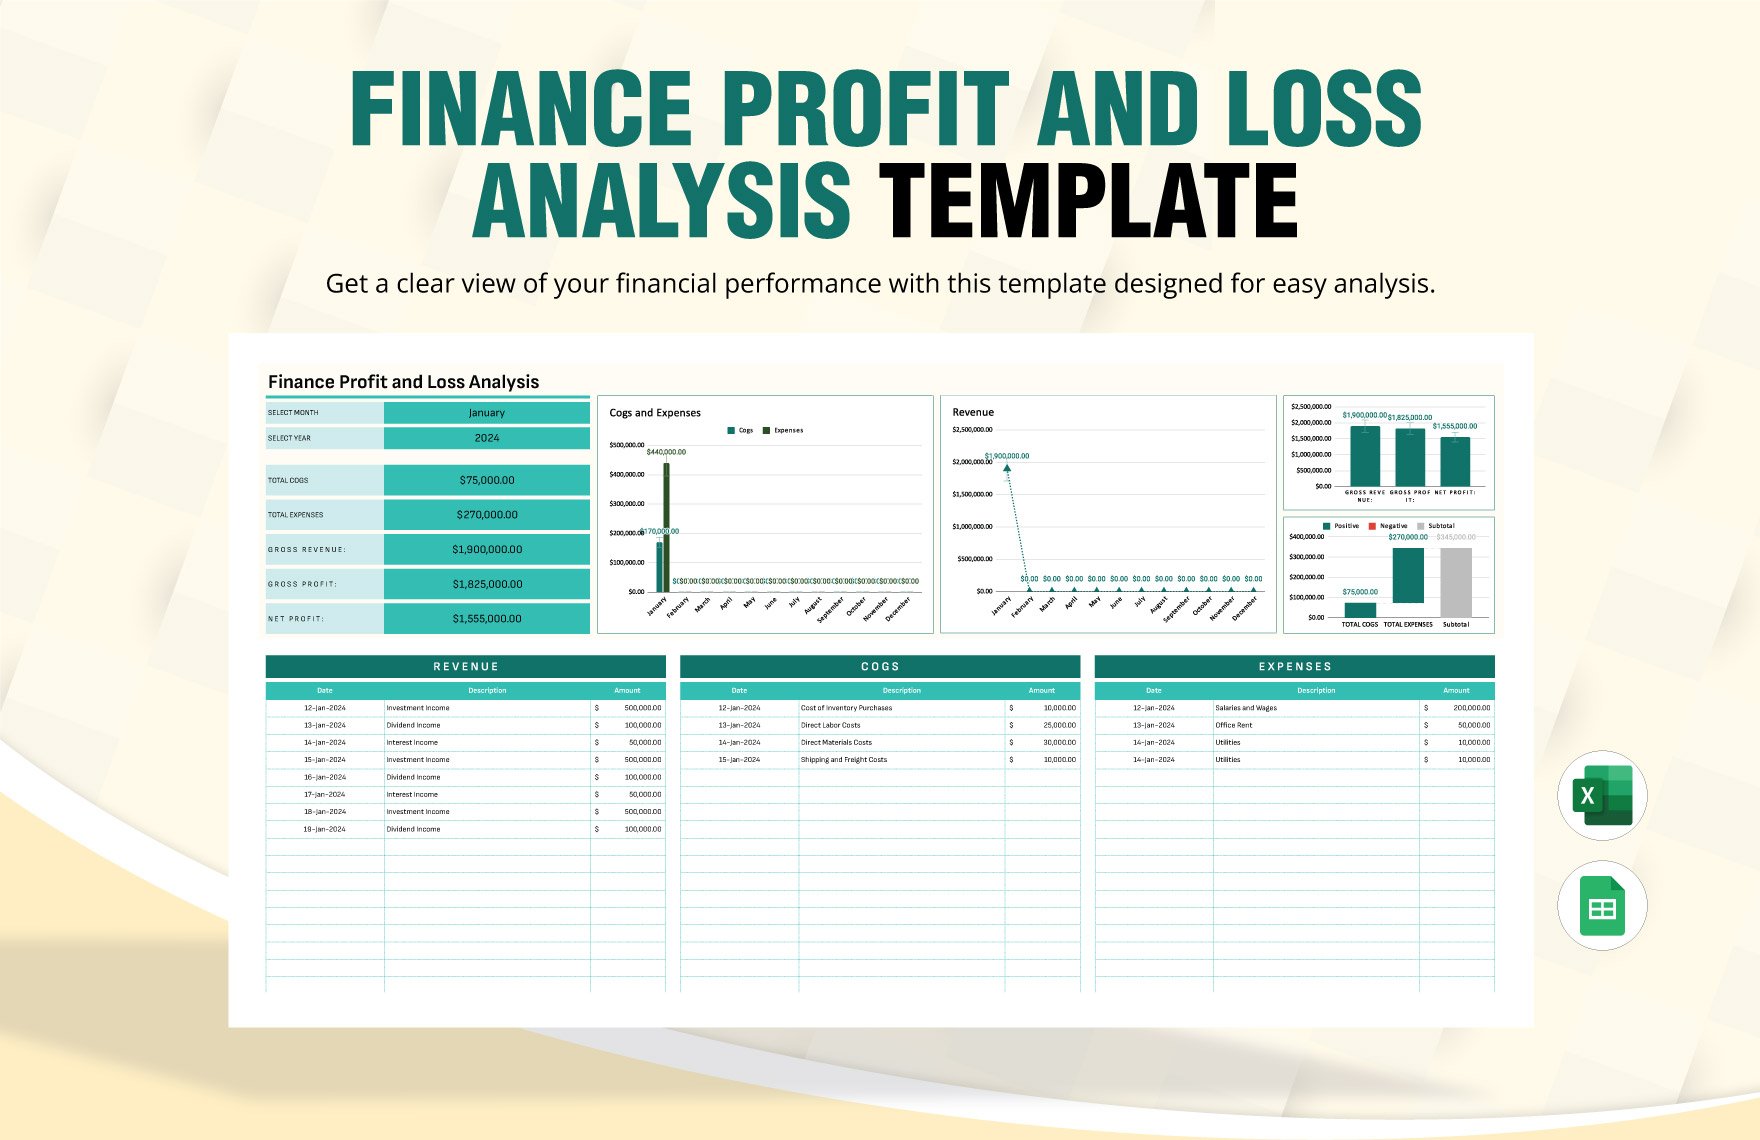 Finance Profit and Loss Analysis Template